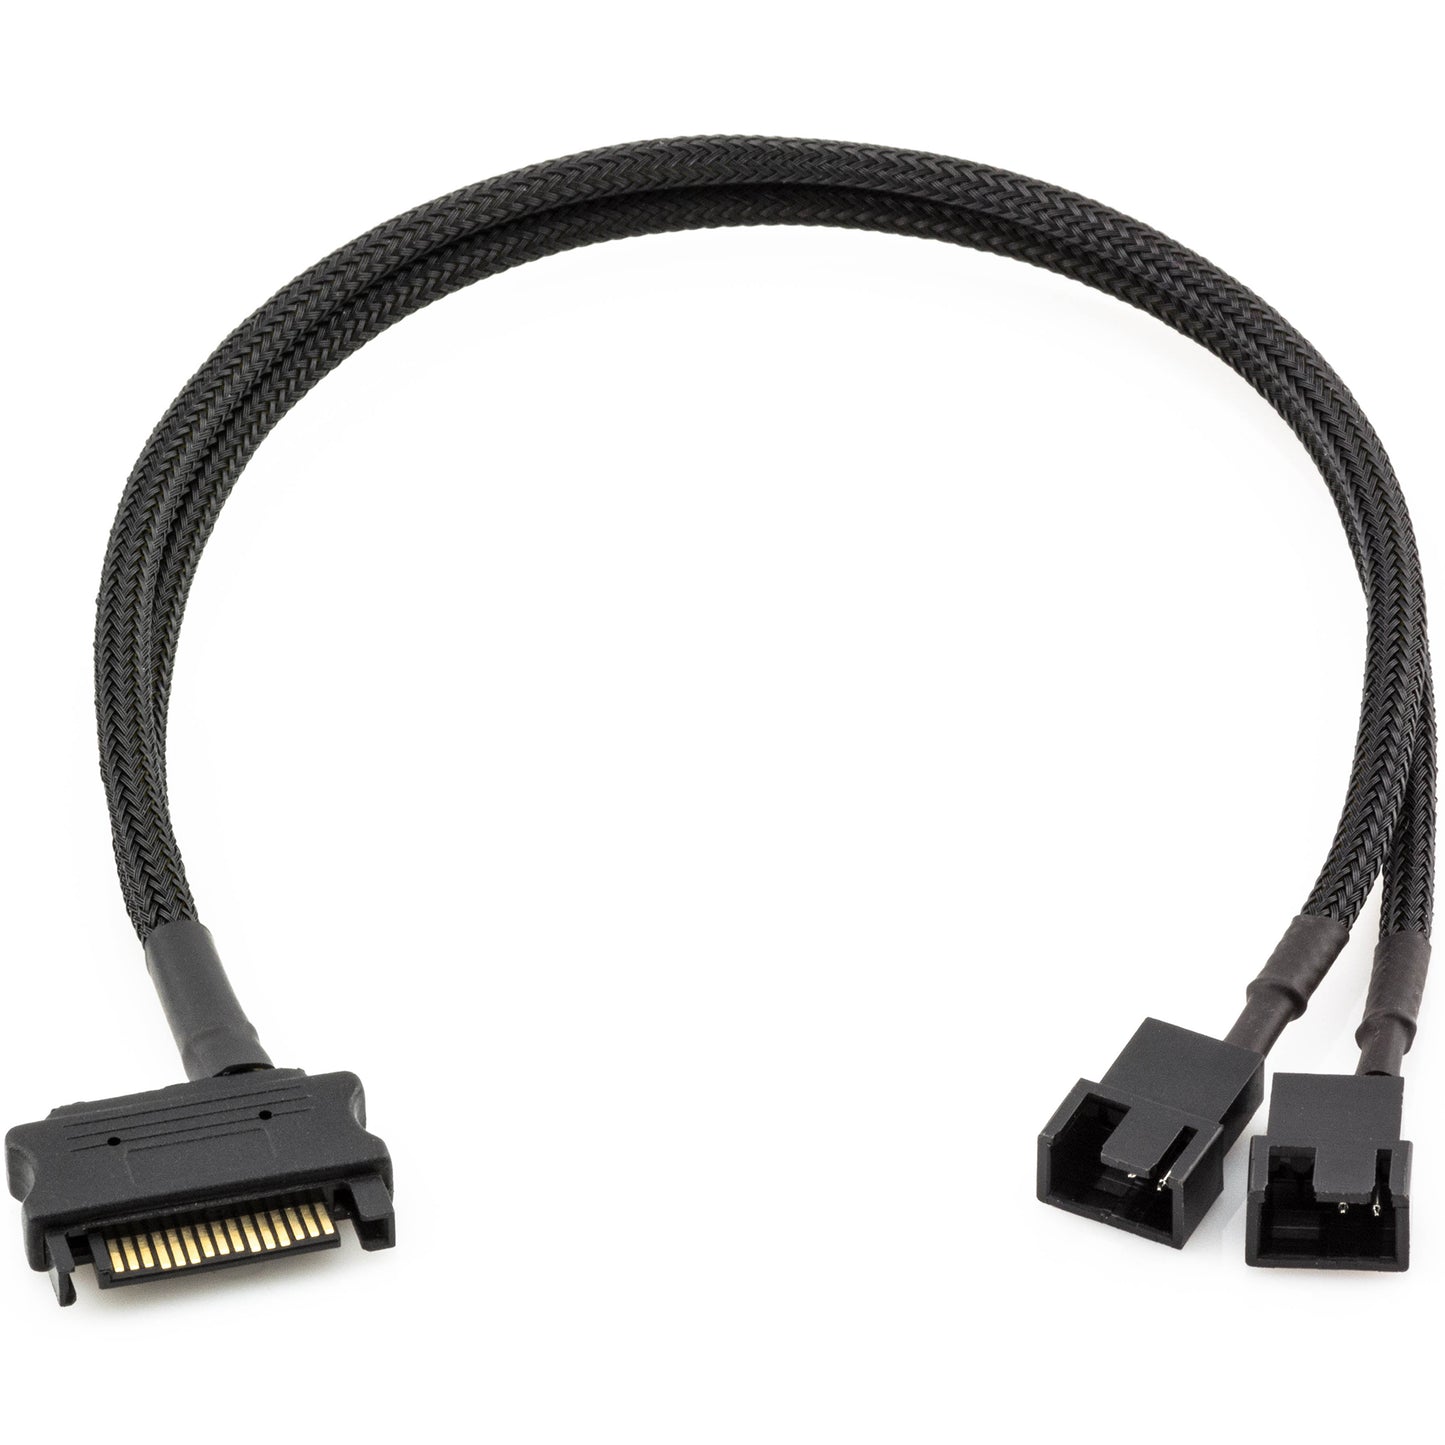 SATA to Dual Fan 12V Sleeved Power Adapter Cable